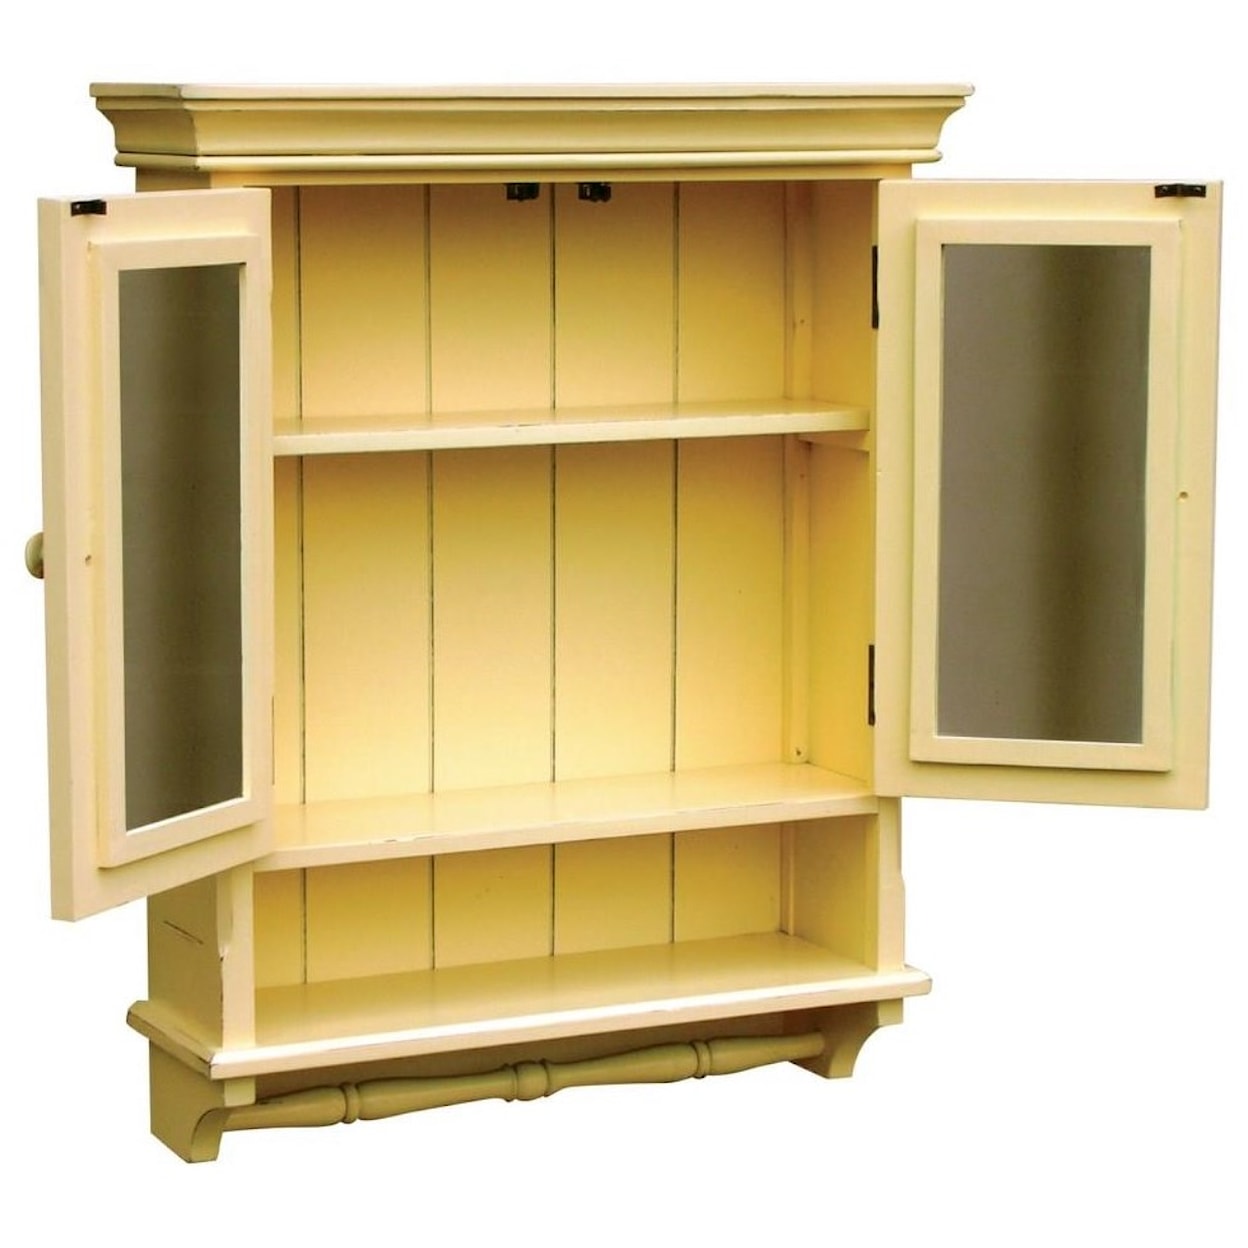 Trade Winds Furniture Accents and Accessories Provincial Mirrored Cabinet